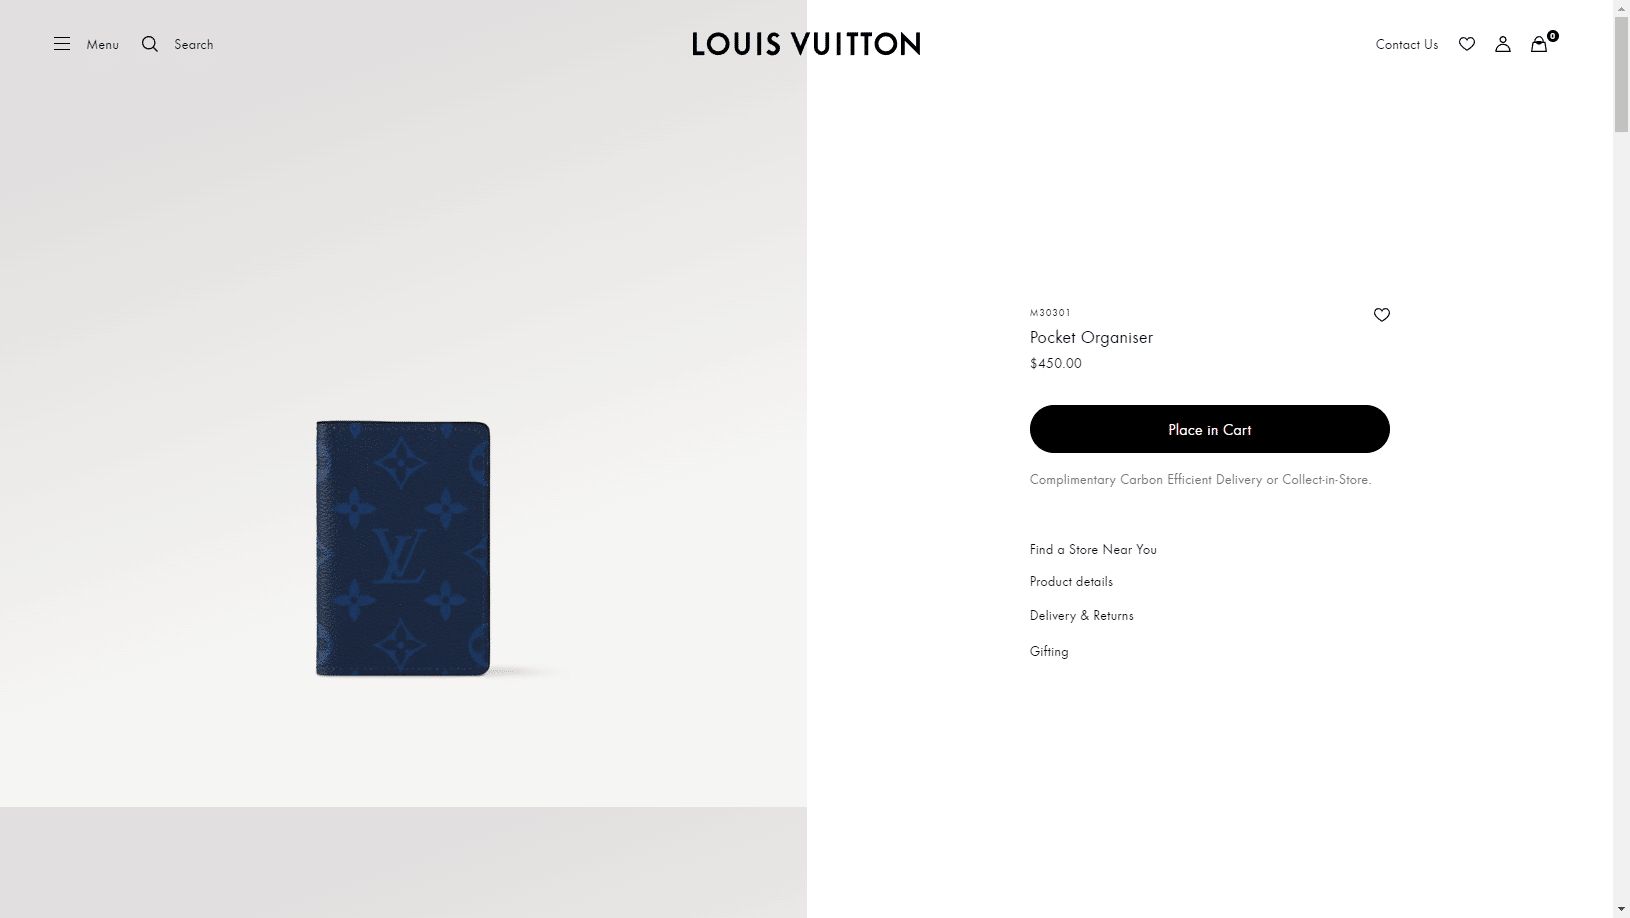 Pocket-Organiser-Taigarama-All-Wallets-and-Small-Leather-Goods-M30301-LOUIS-VUITTON.png